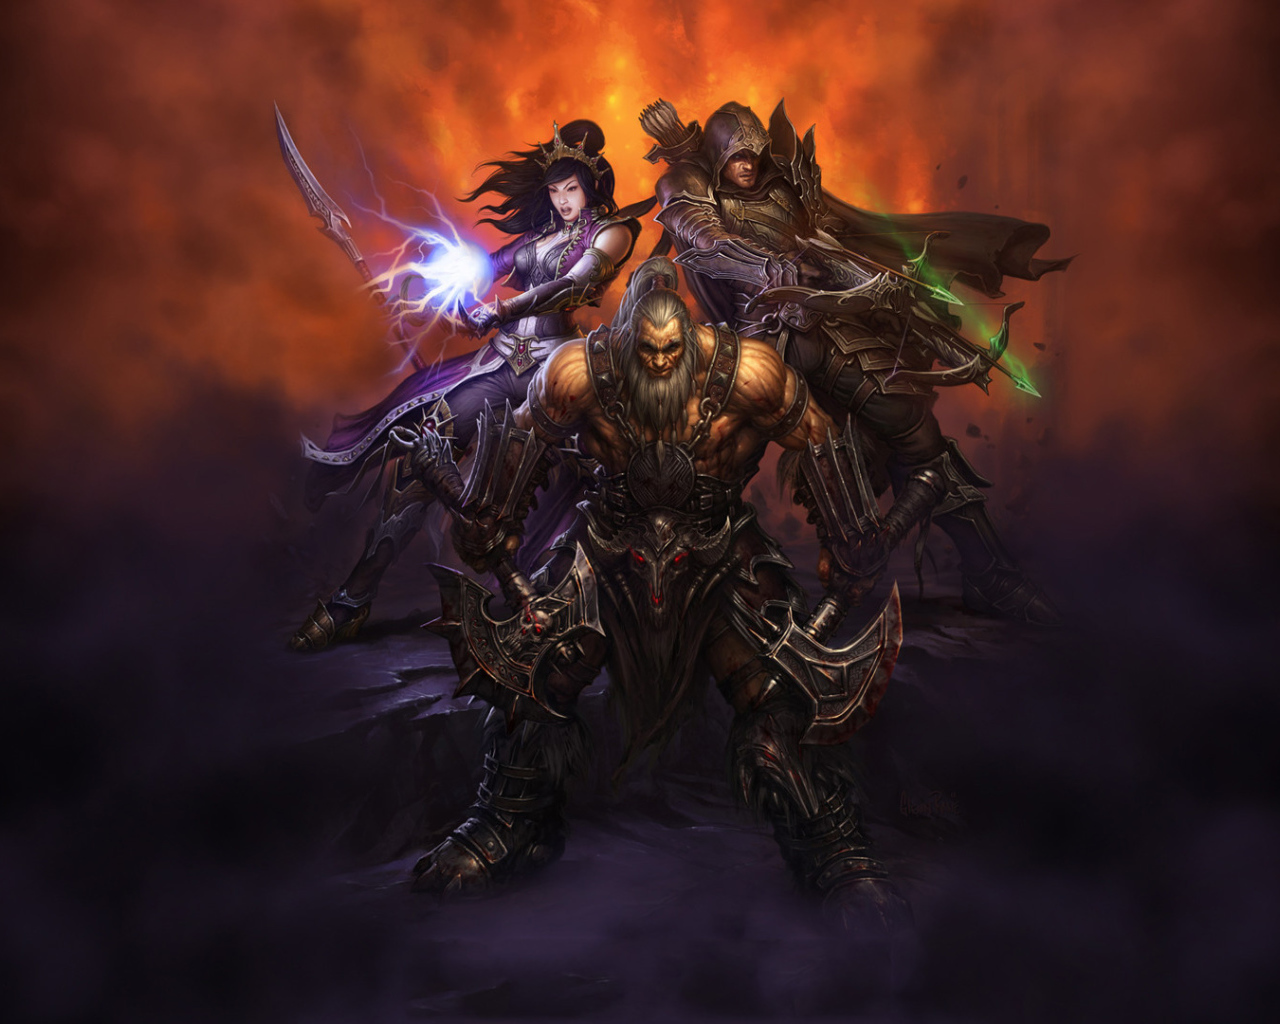 Diablo III: the barbarian mage and assassin